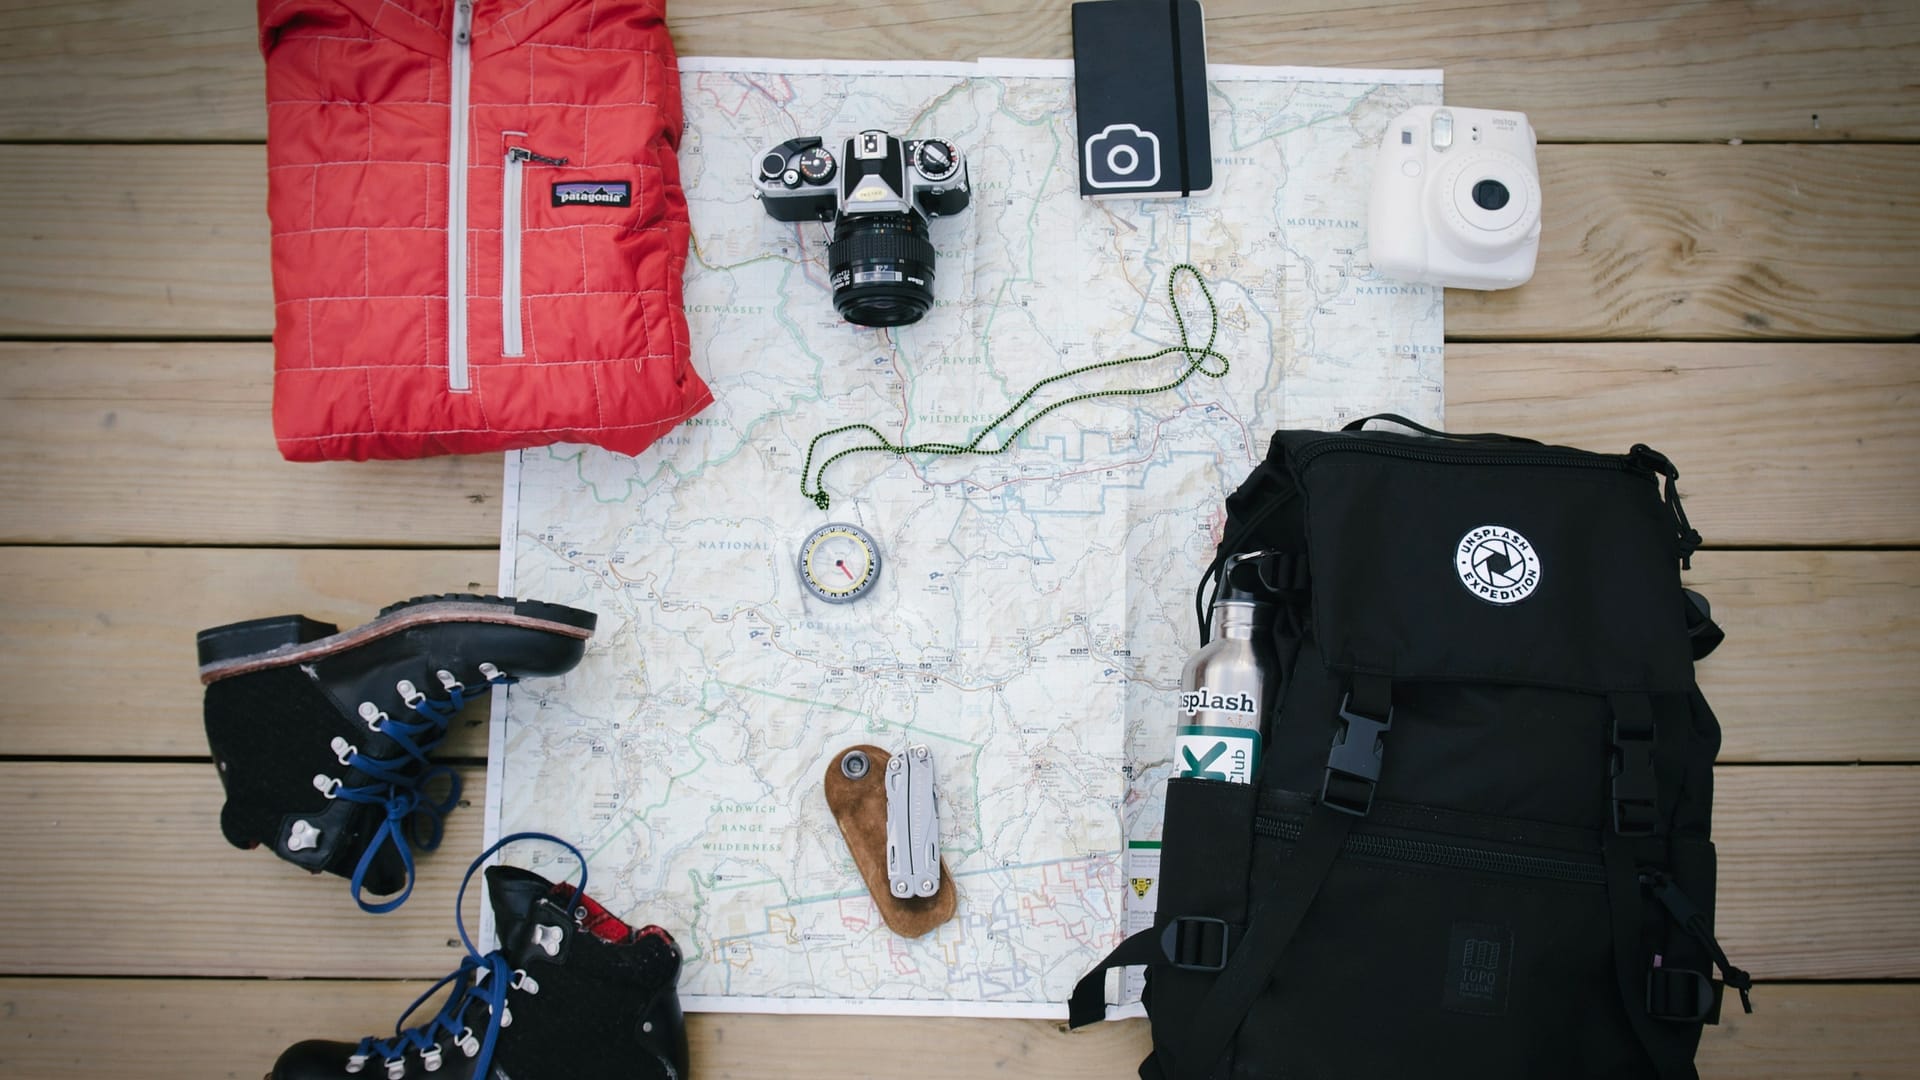 Camping suppliers like a backpack and compass spread out on a table over a map getting ready to head out into nature.